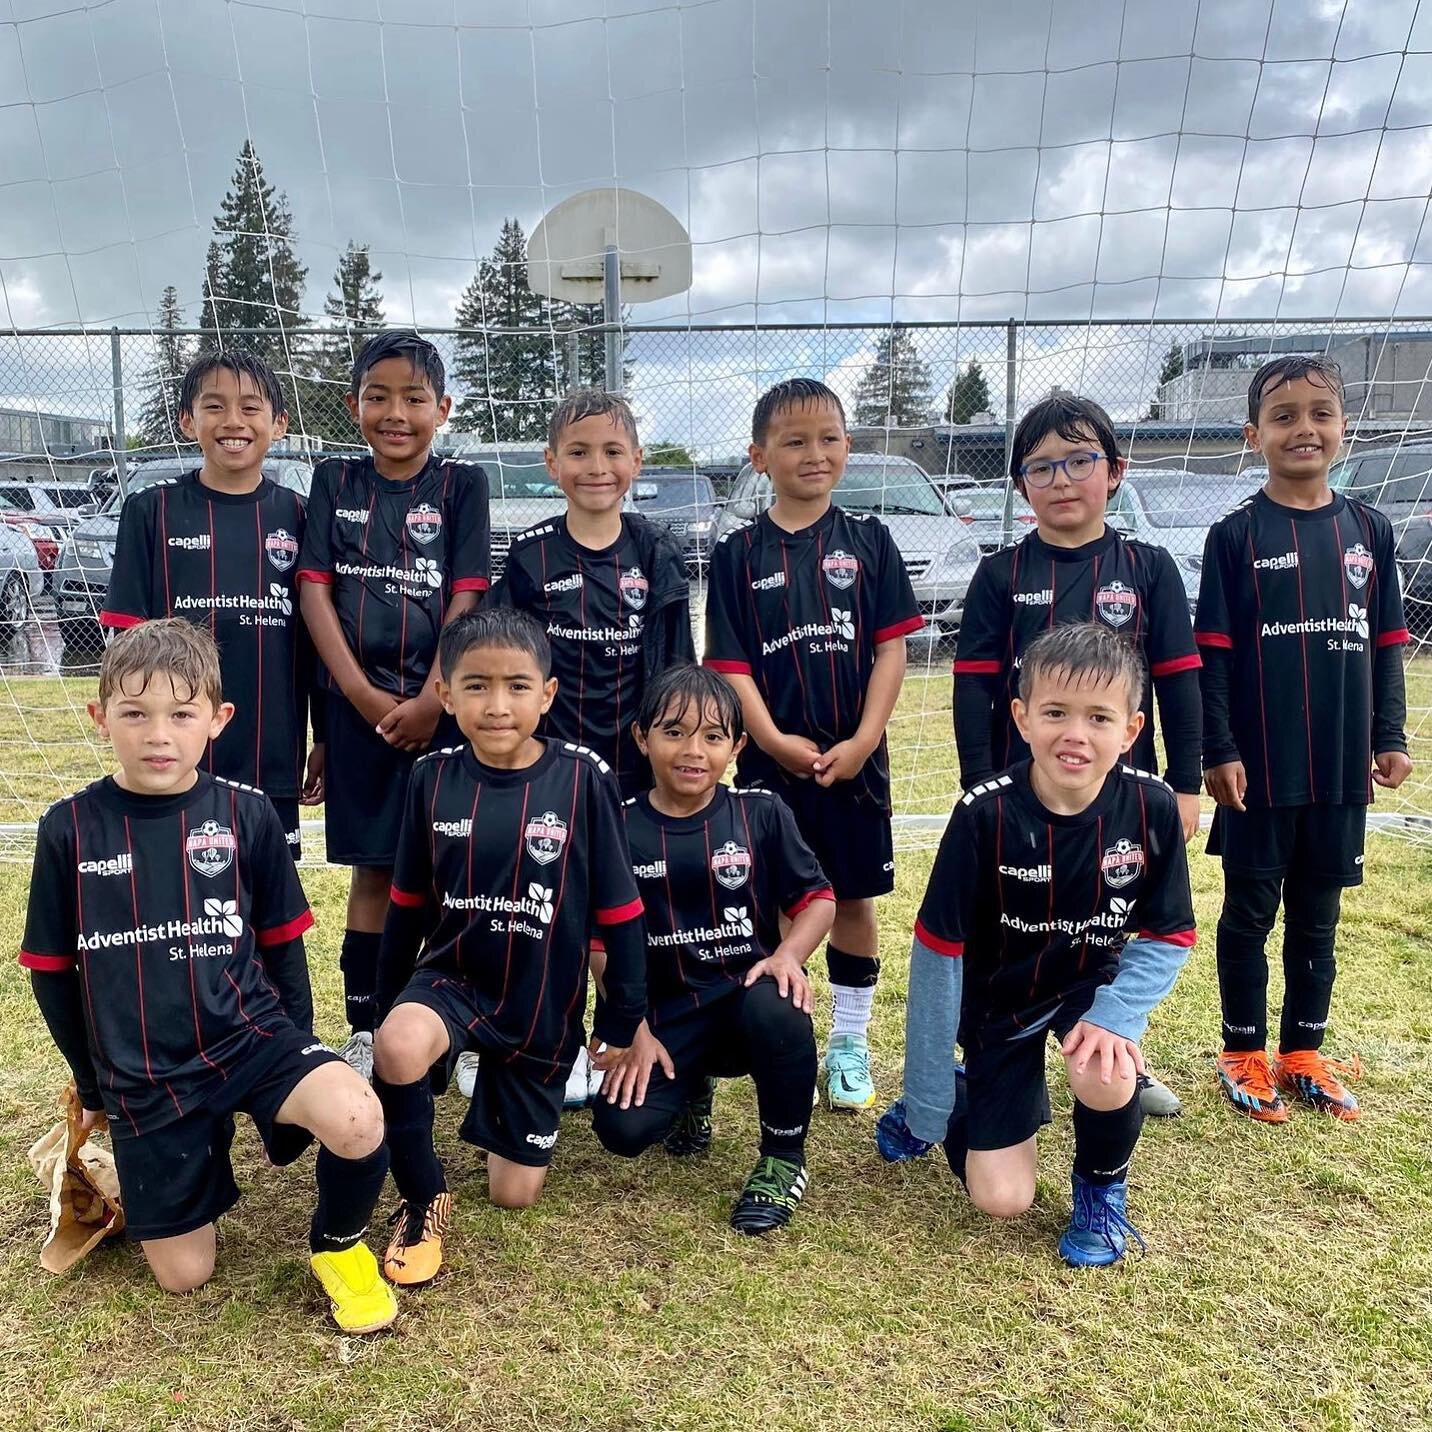 Way to close out the szn boys! 2015 Premier finish off the spring league with a big W! 👏

#napaunited | @capellisport | @adventisthealth | #gameday